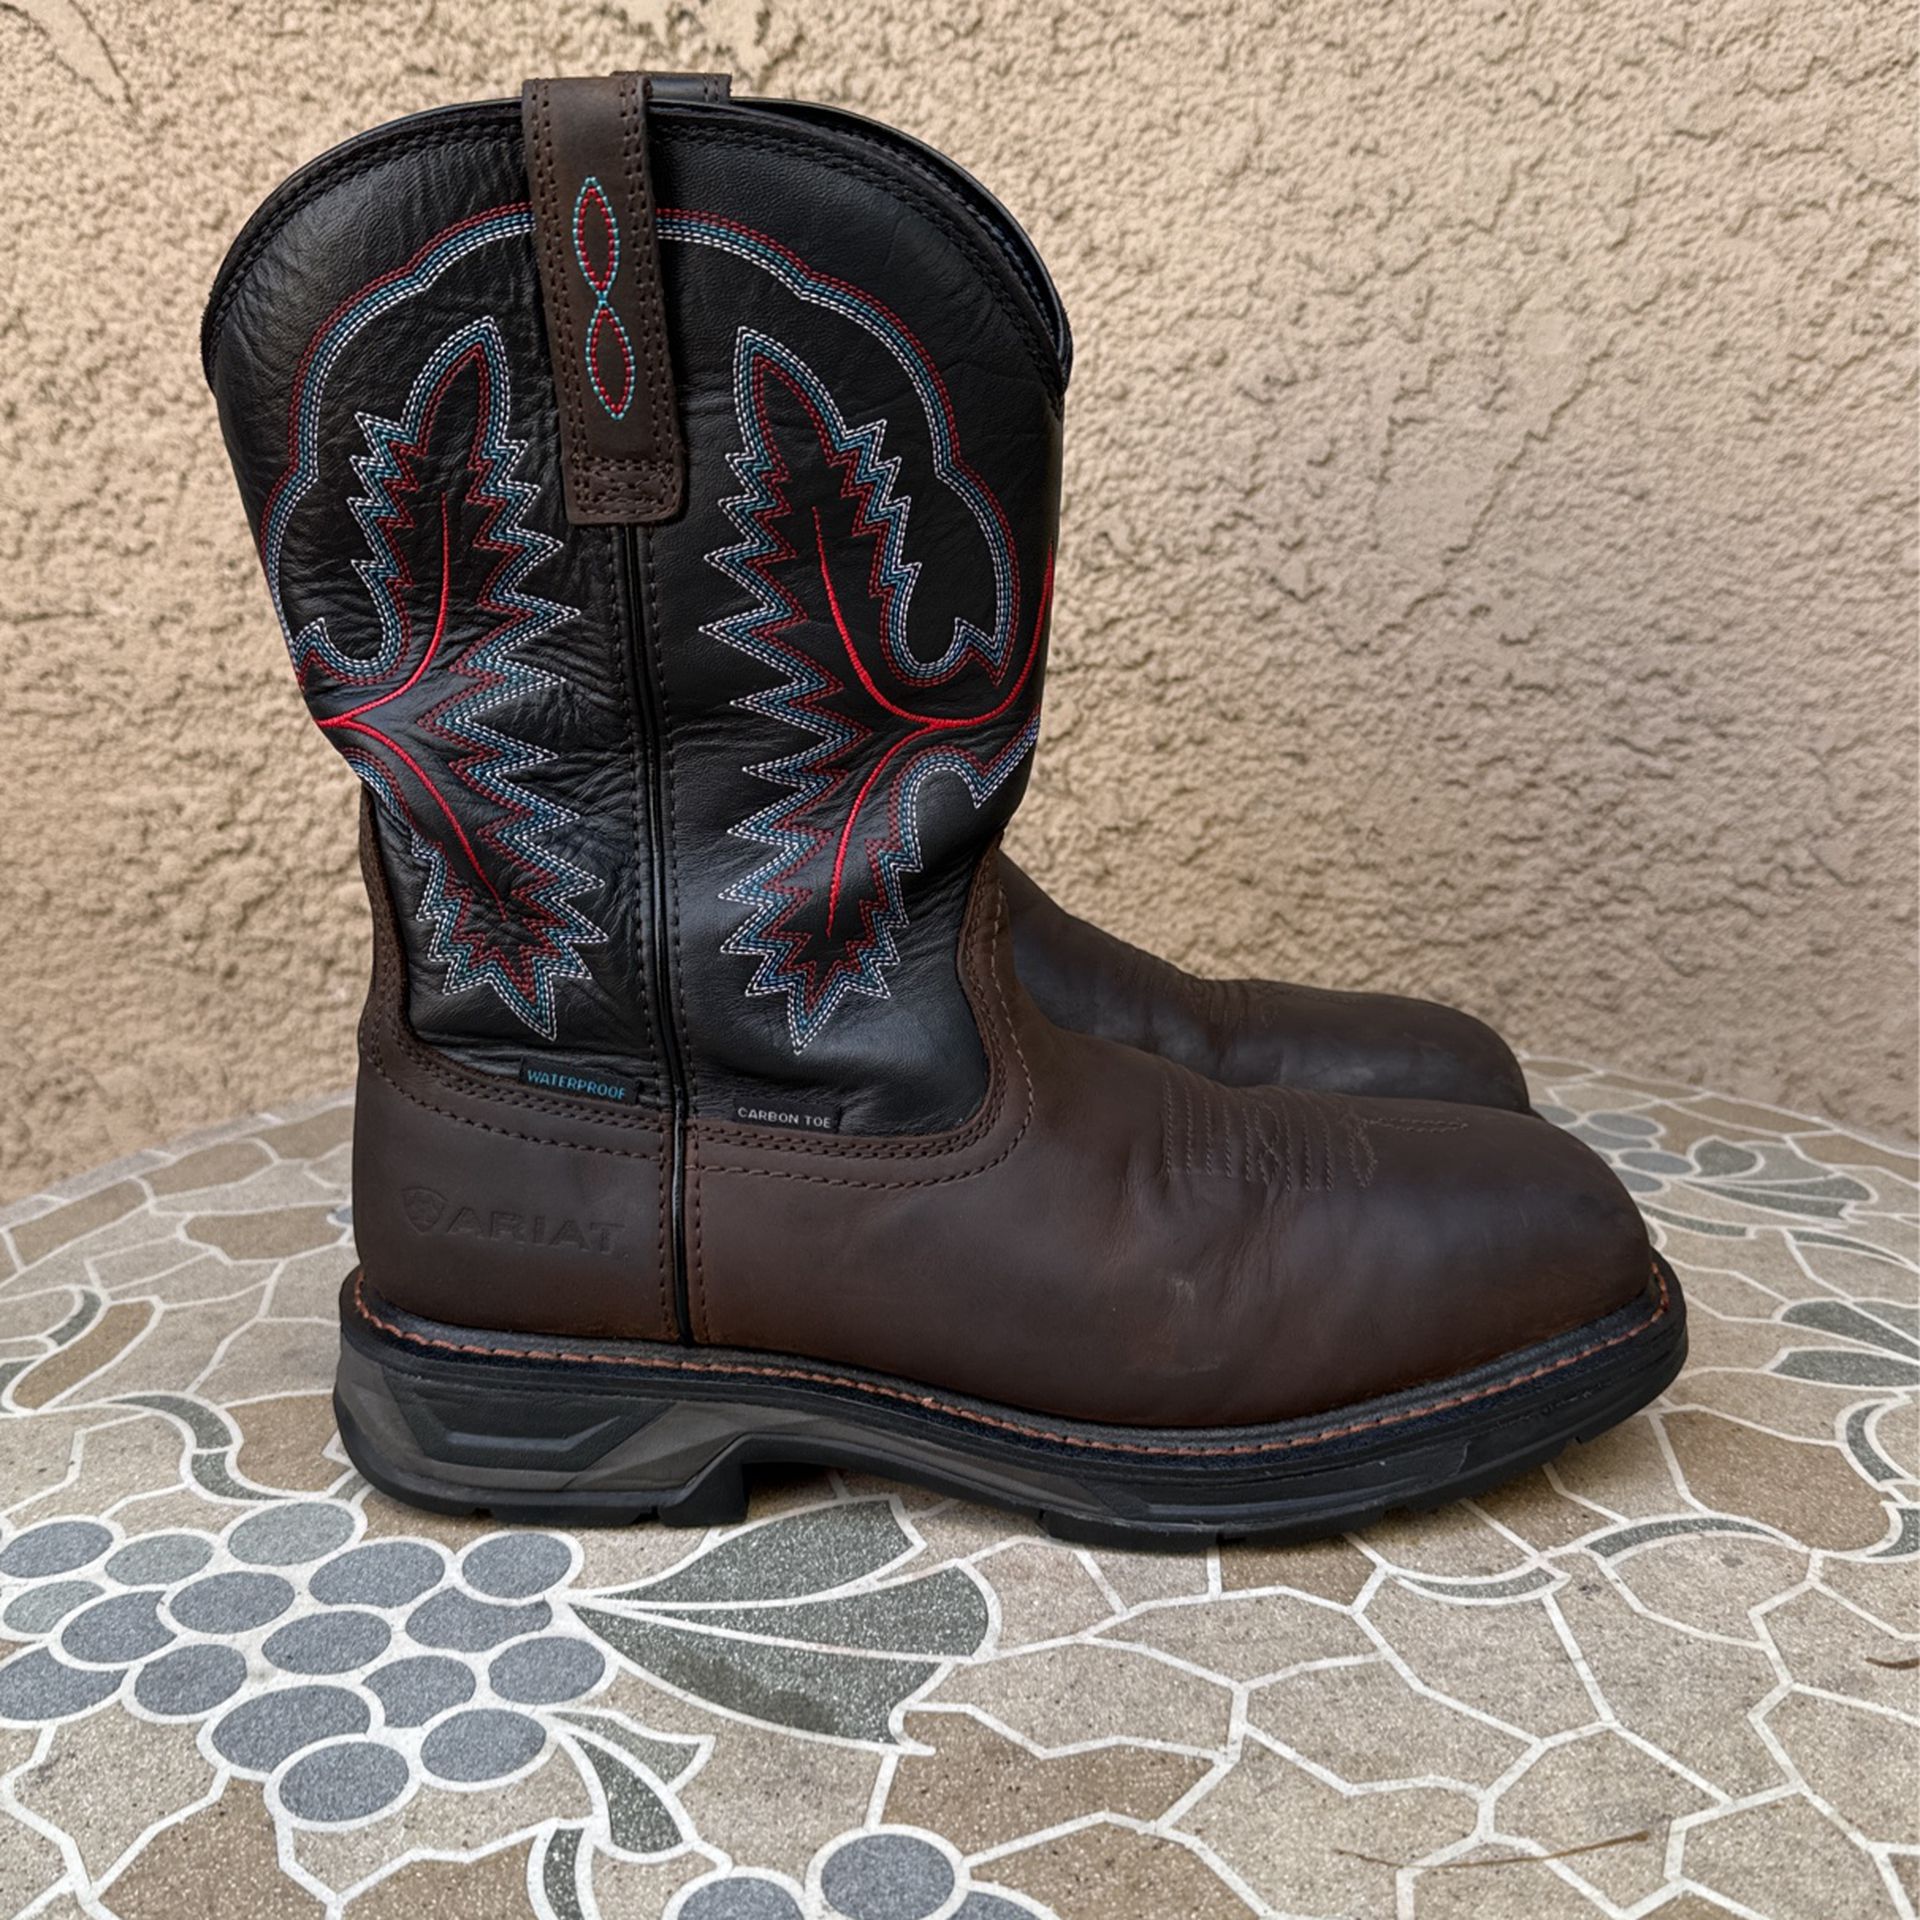 Mens Ariat Boots, Composite Toe, Waterproof, Size 10.5